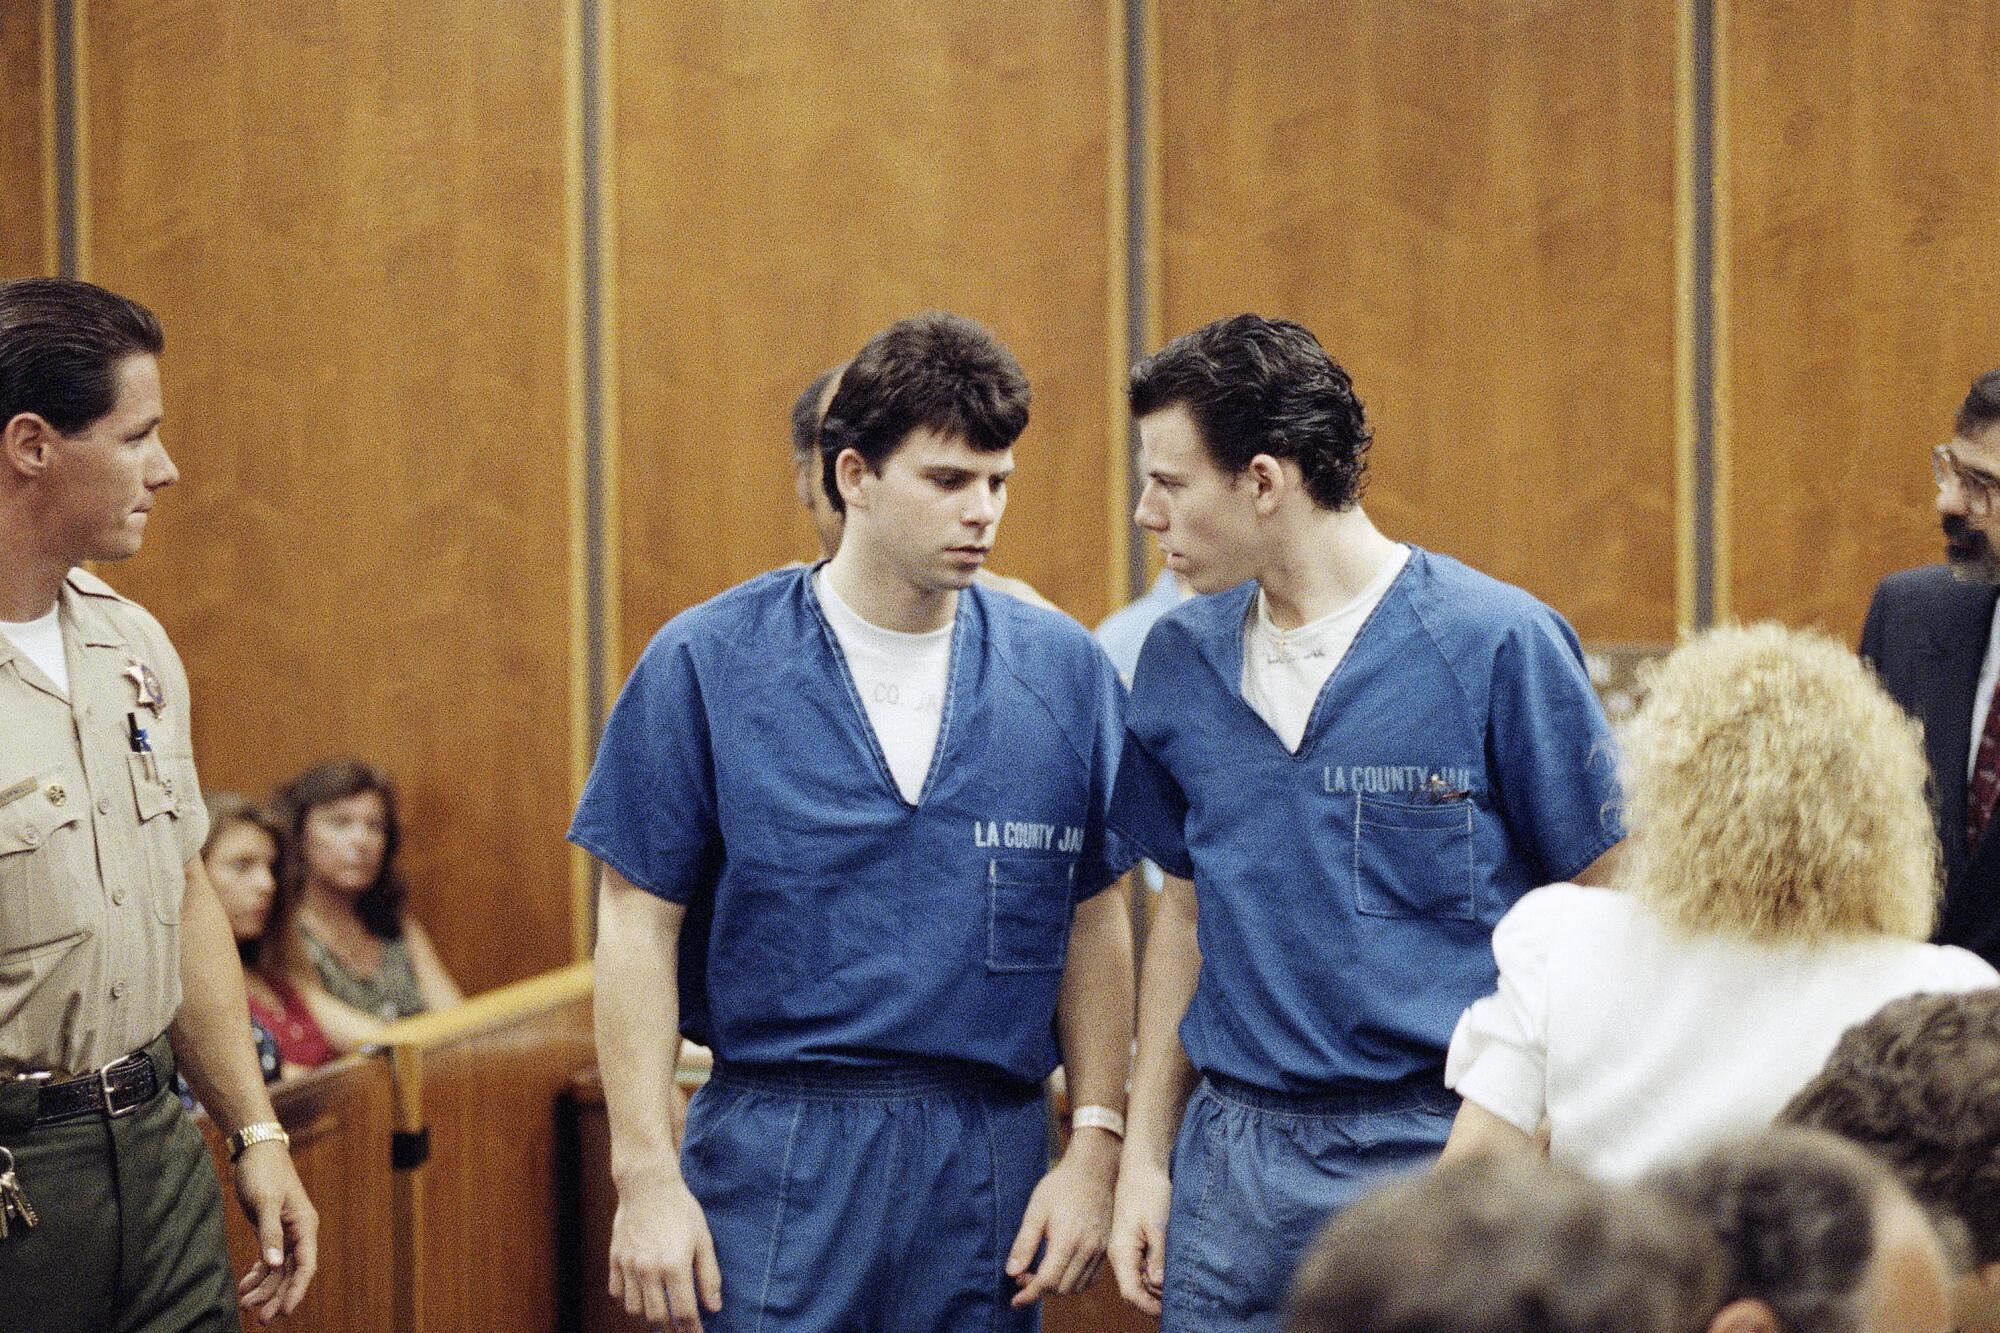 Menendez brothers want court to vacate convictions amid new evidence